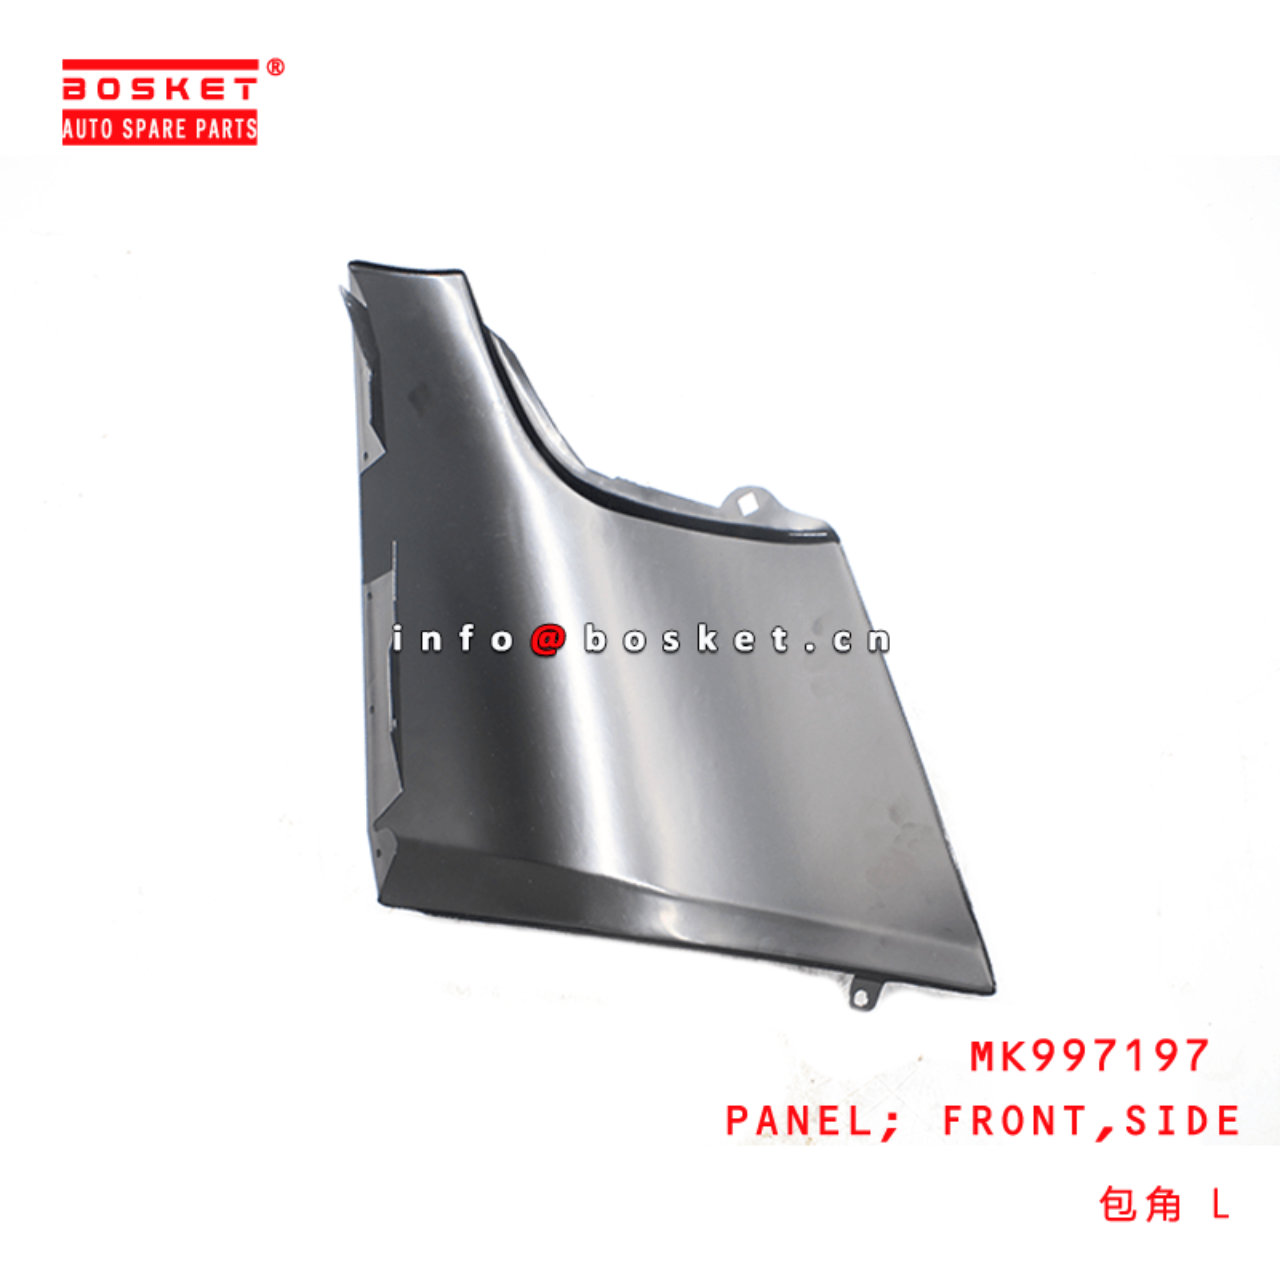 MK997197 Side Front Panel RH Suitable For MITSUBISHI FUSO CANTER RUS